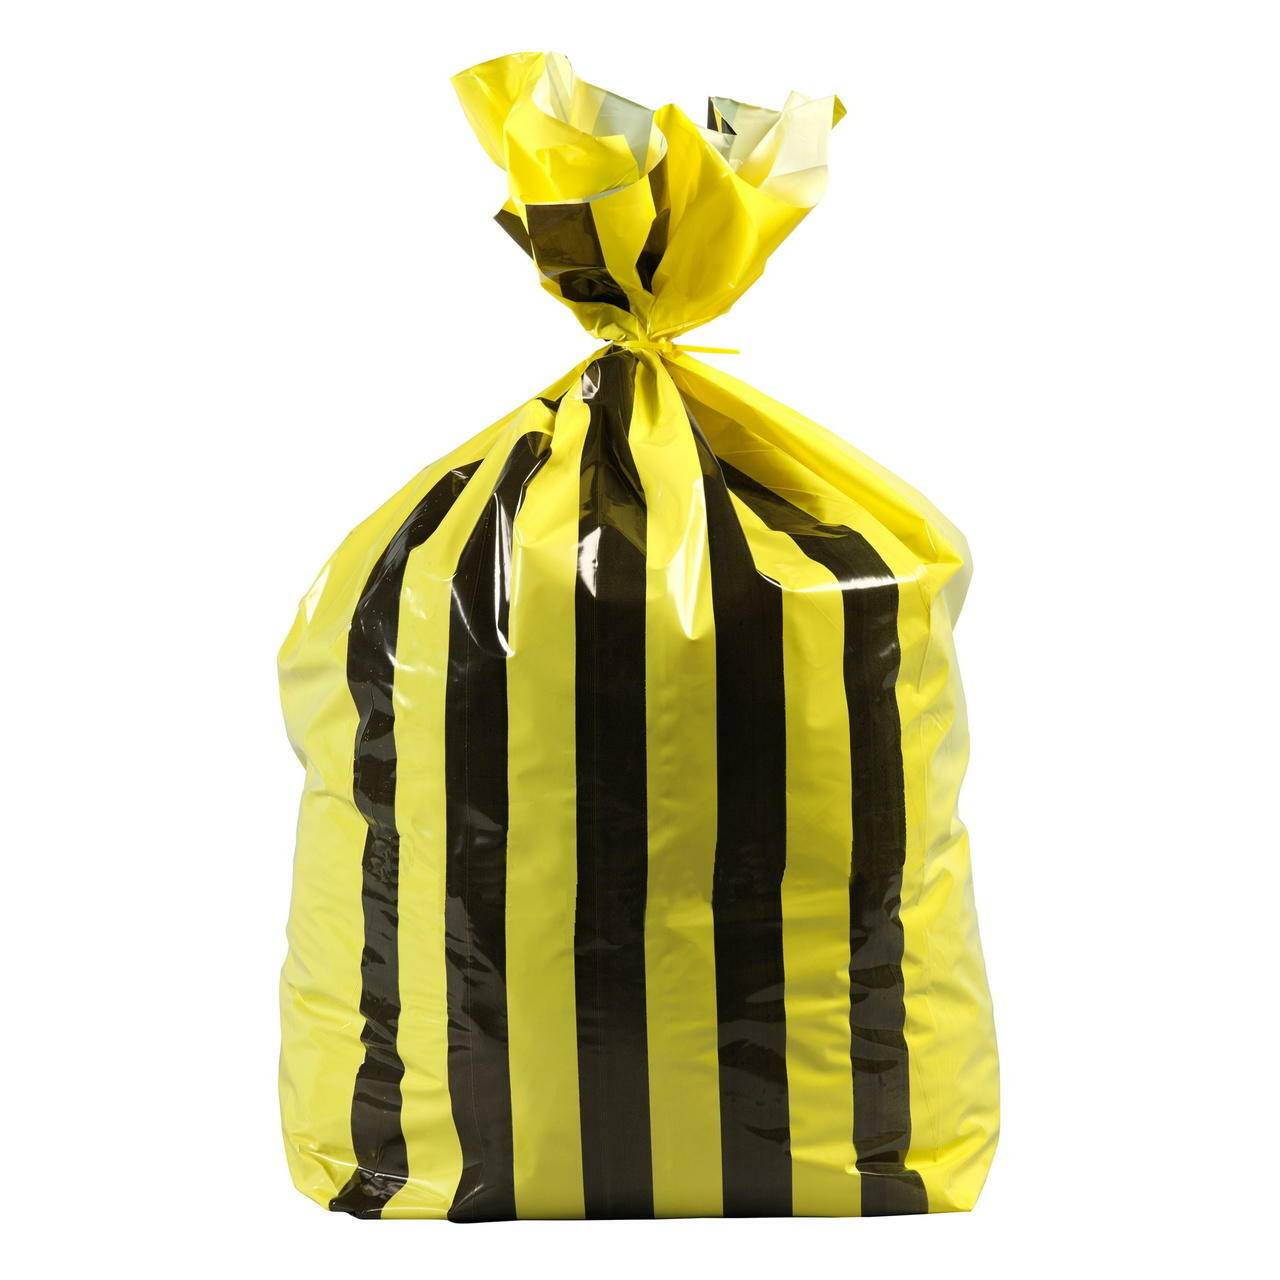 90L Large Double Sided Print Tiger Stripe Polythene Offensive Waste Bags 25mu - 1 Roll of 25